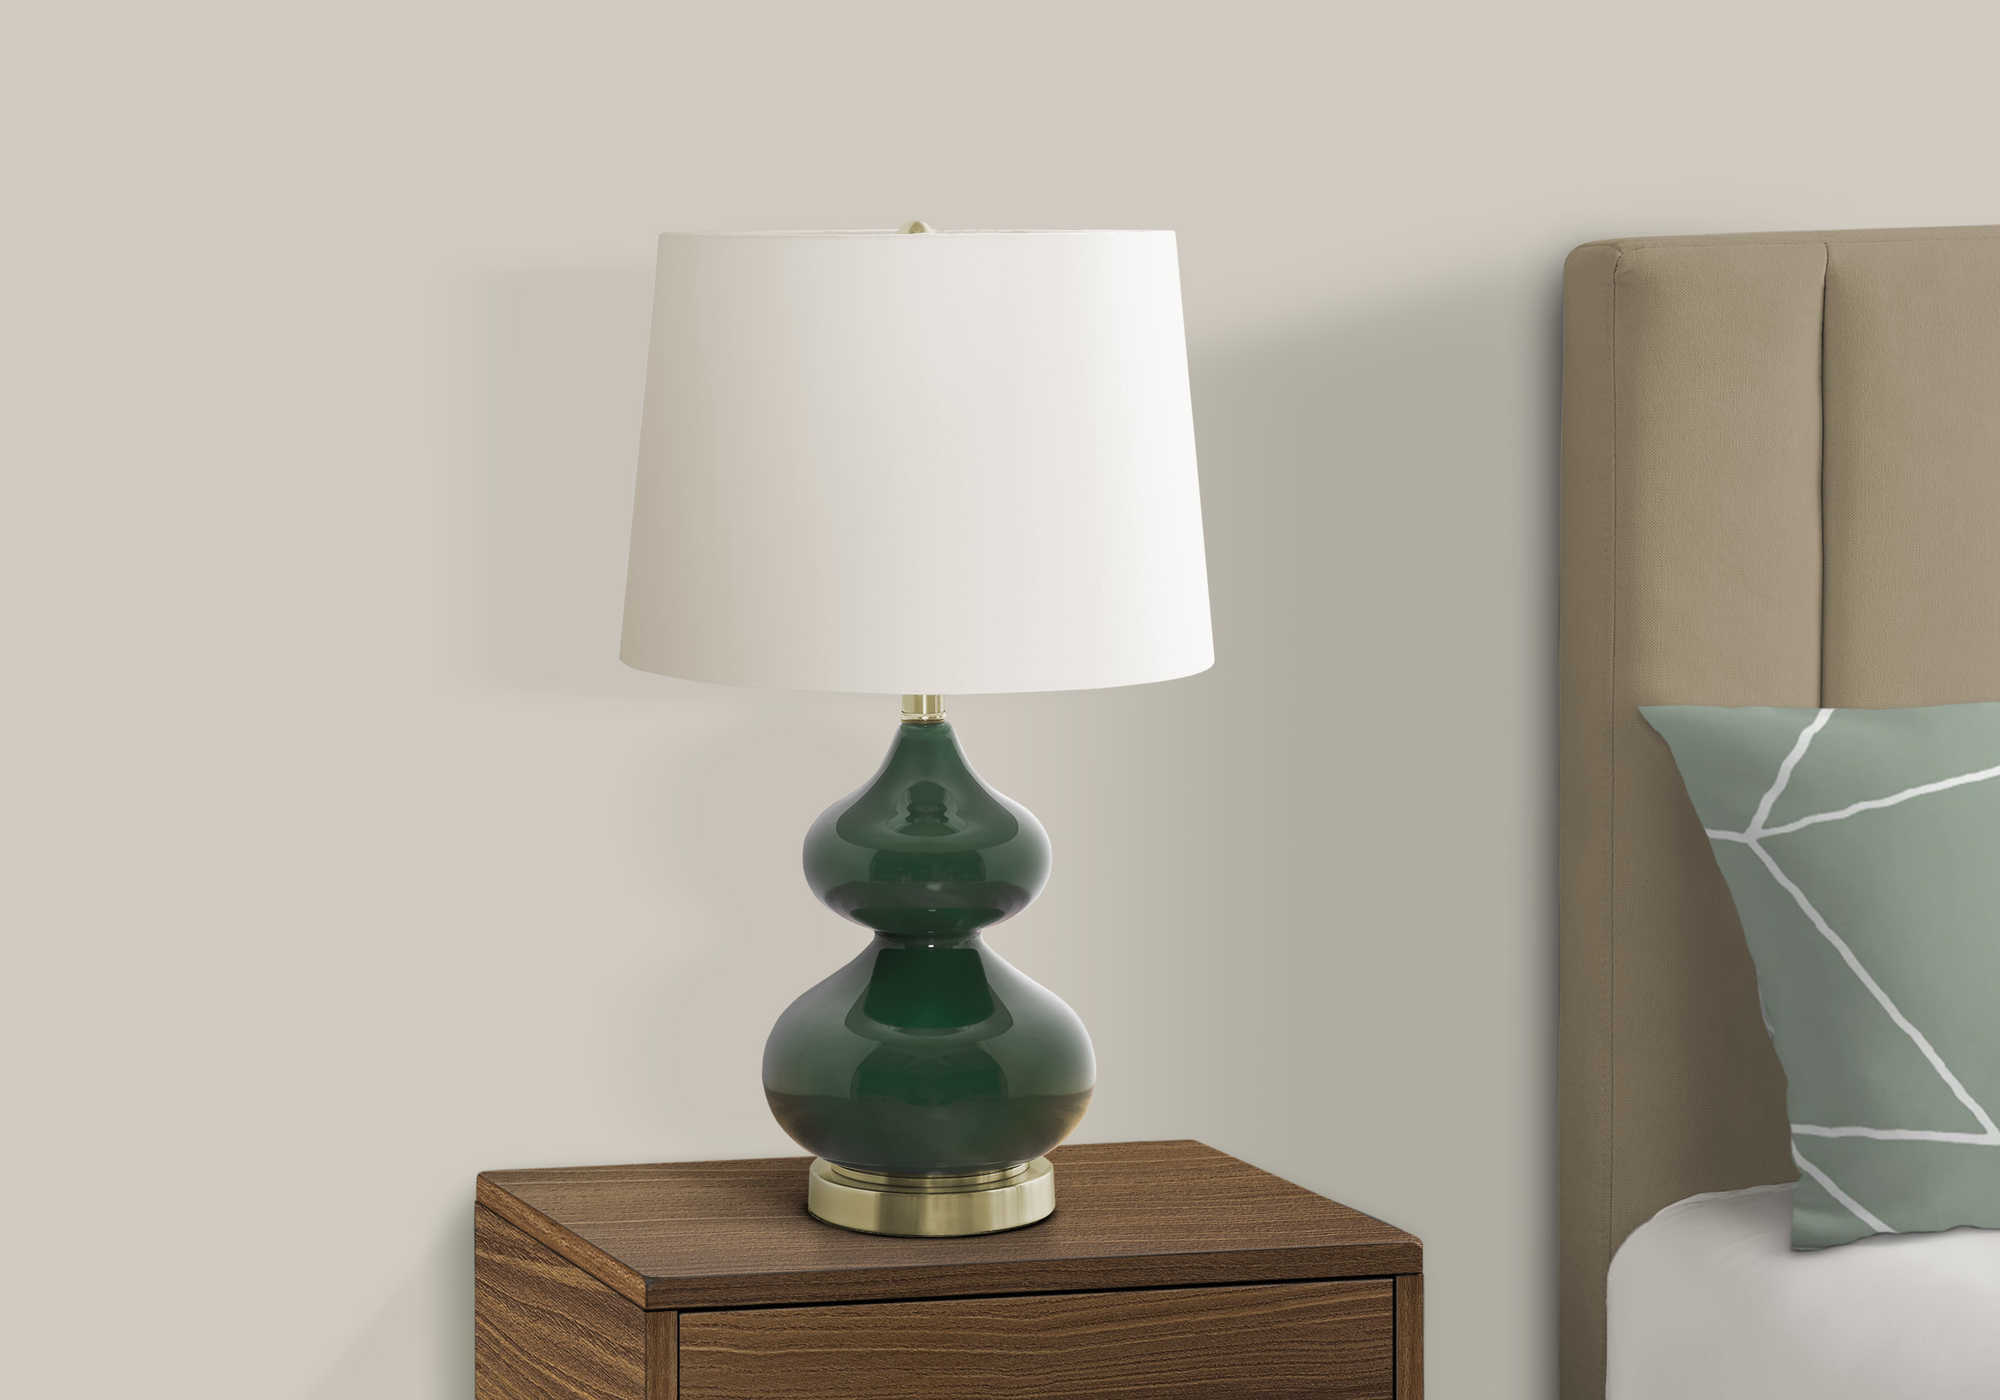 LIGHTING - 24"H TABLE LAMP GREEN GLASS / IVORY SHADE